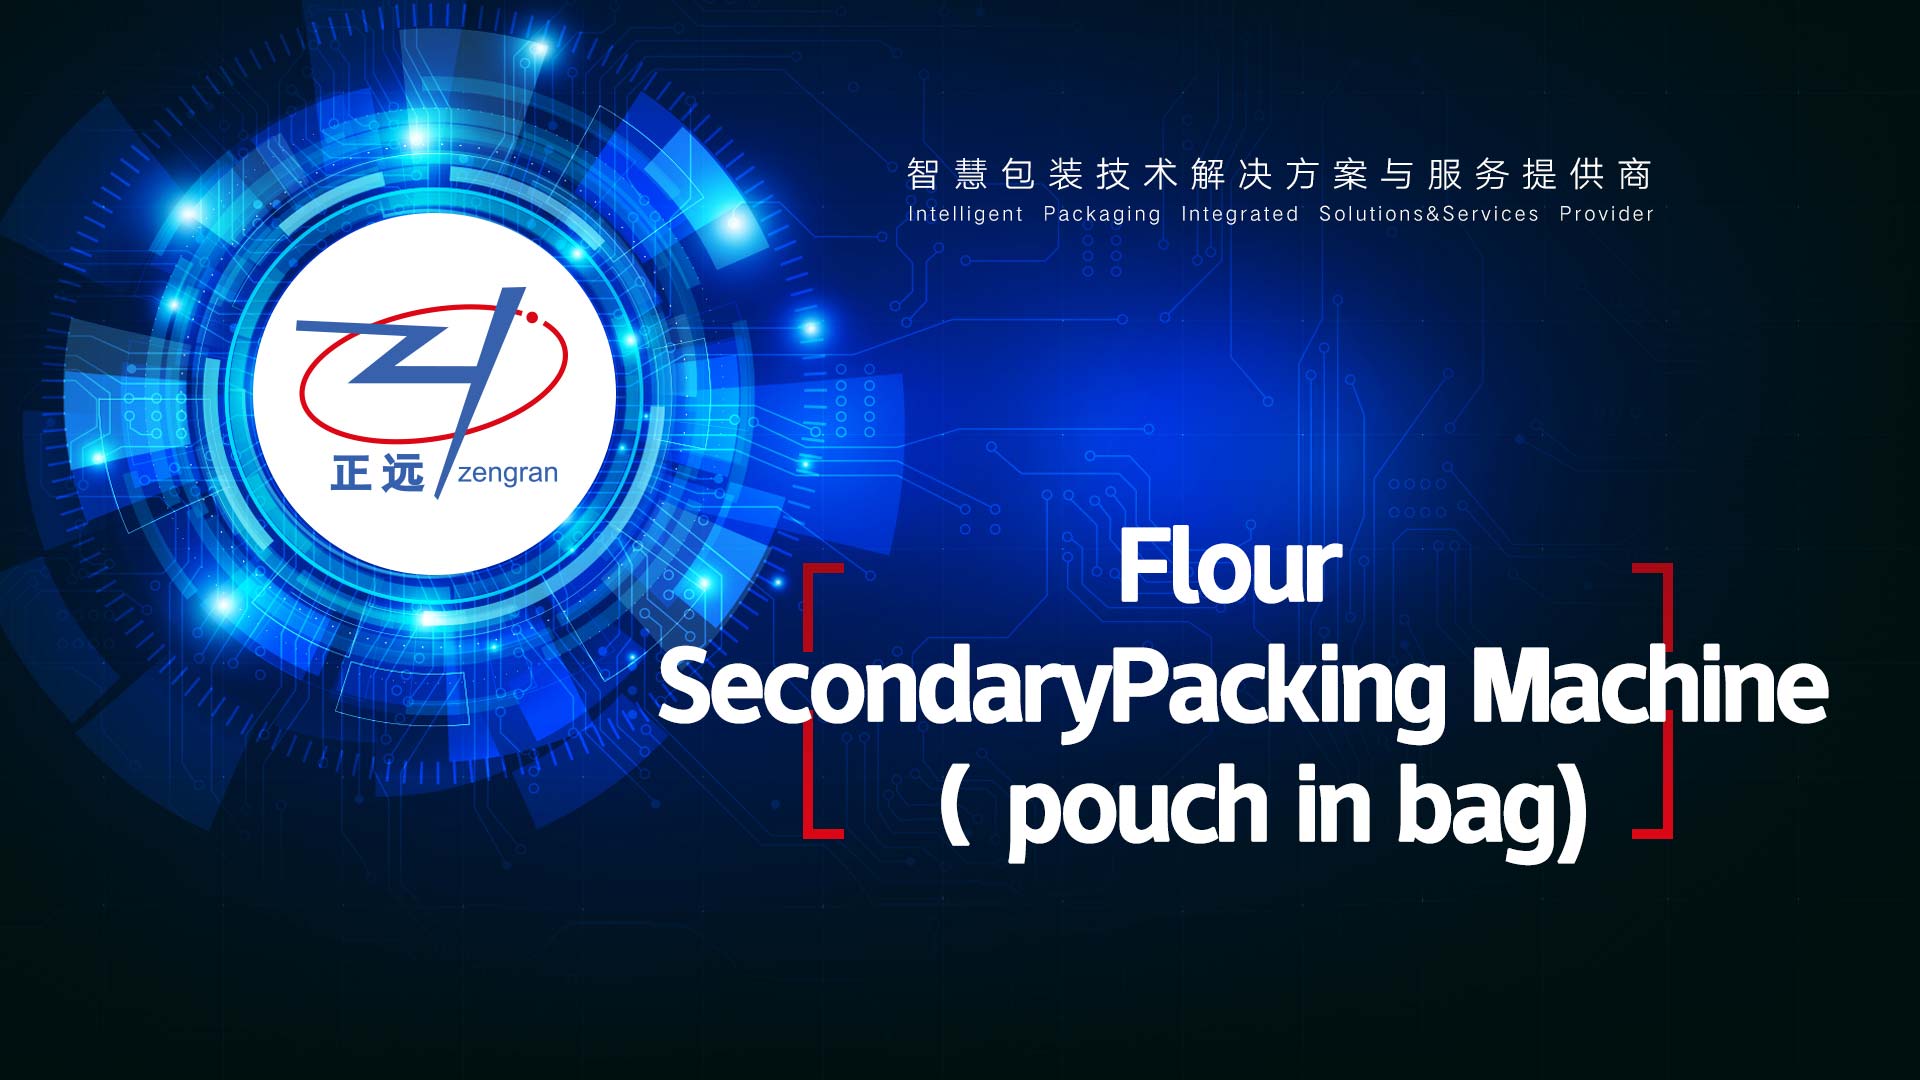 Flour Secondary Packaging Machine Unit: High Speed (Double Stations) Bag In Bag Filling System